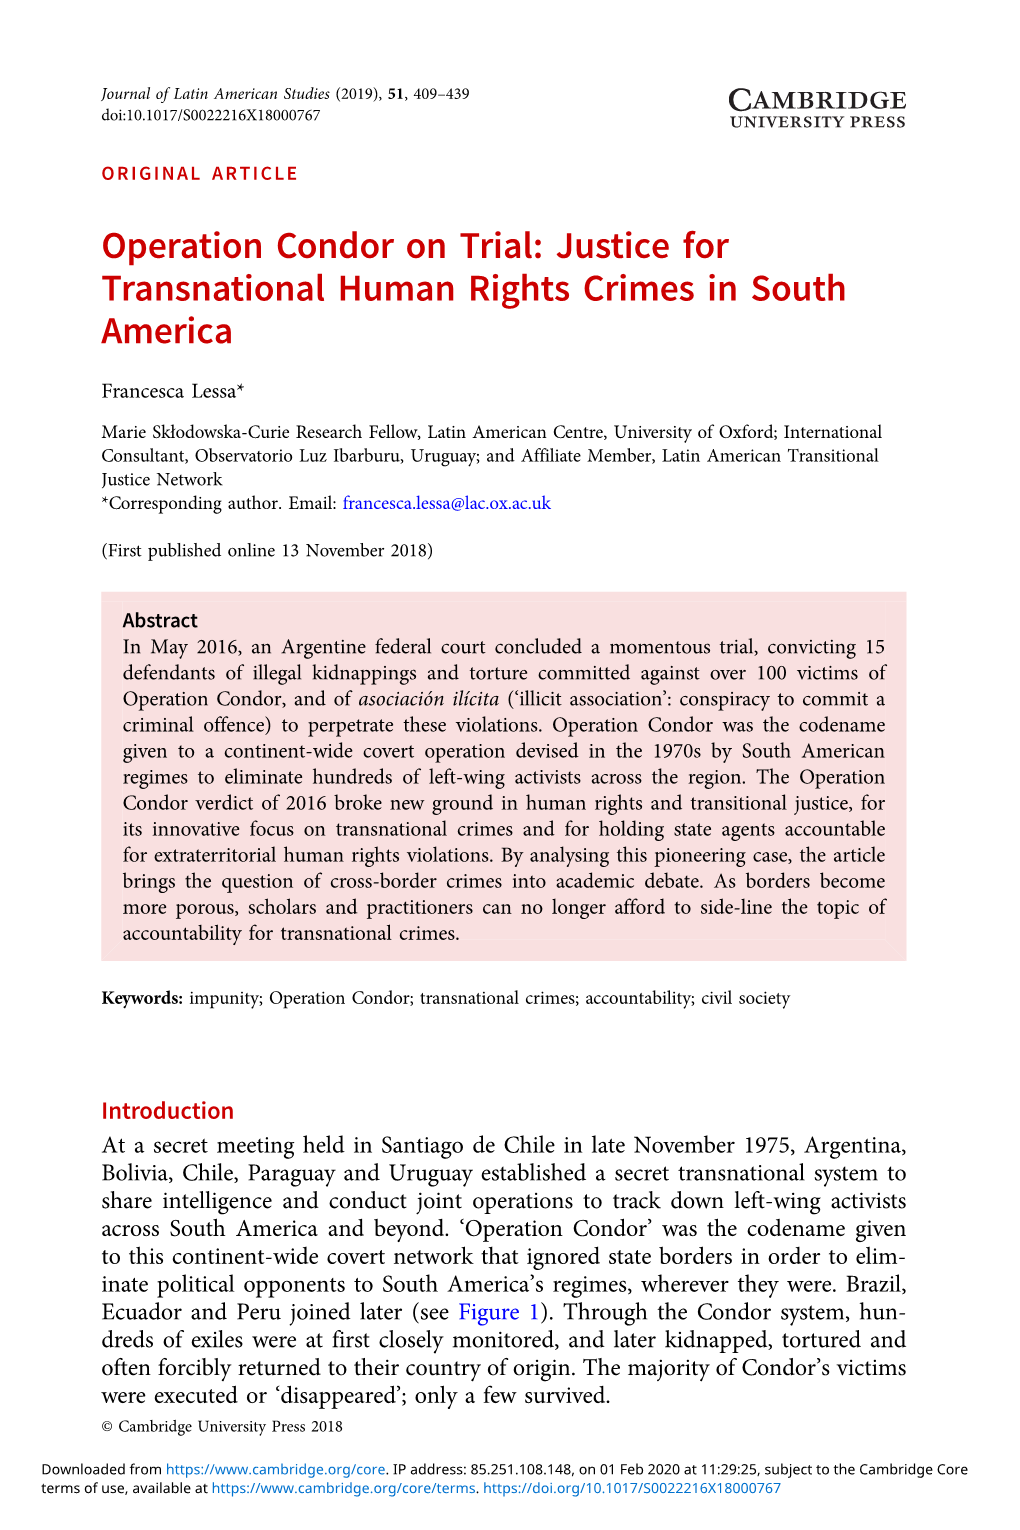 Operation Condor on Trial: Justice for Transnational Human Rights Crimes in South America